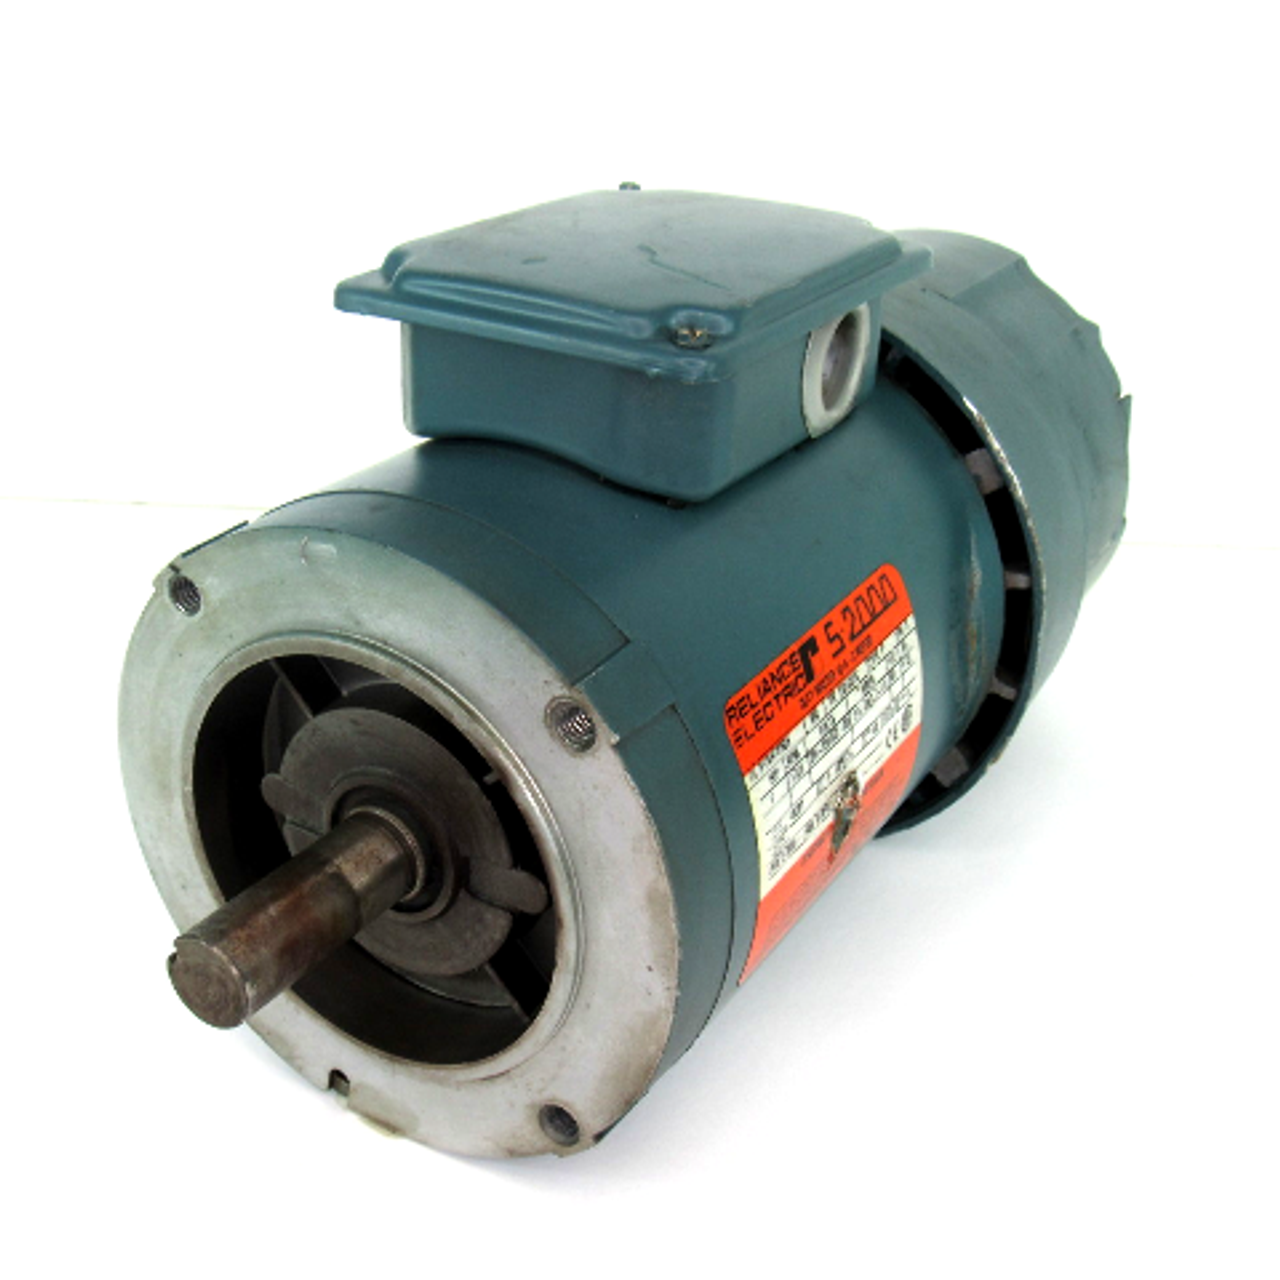 Reliance Electric P14H7206N AC Motor, 3-Phase, 1HP, 1725RPM